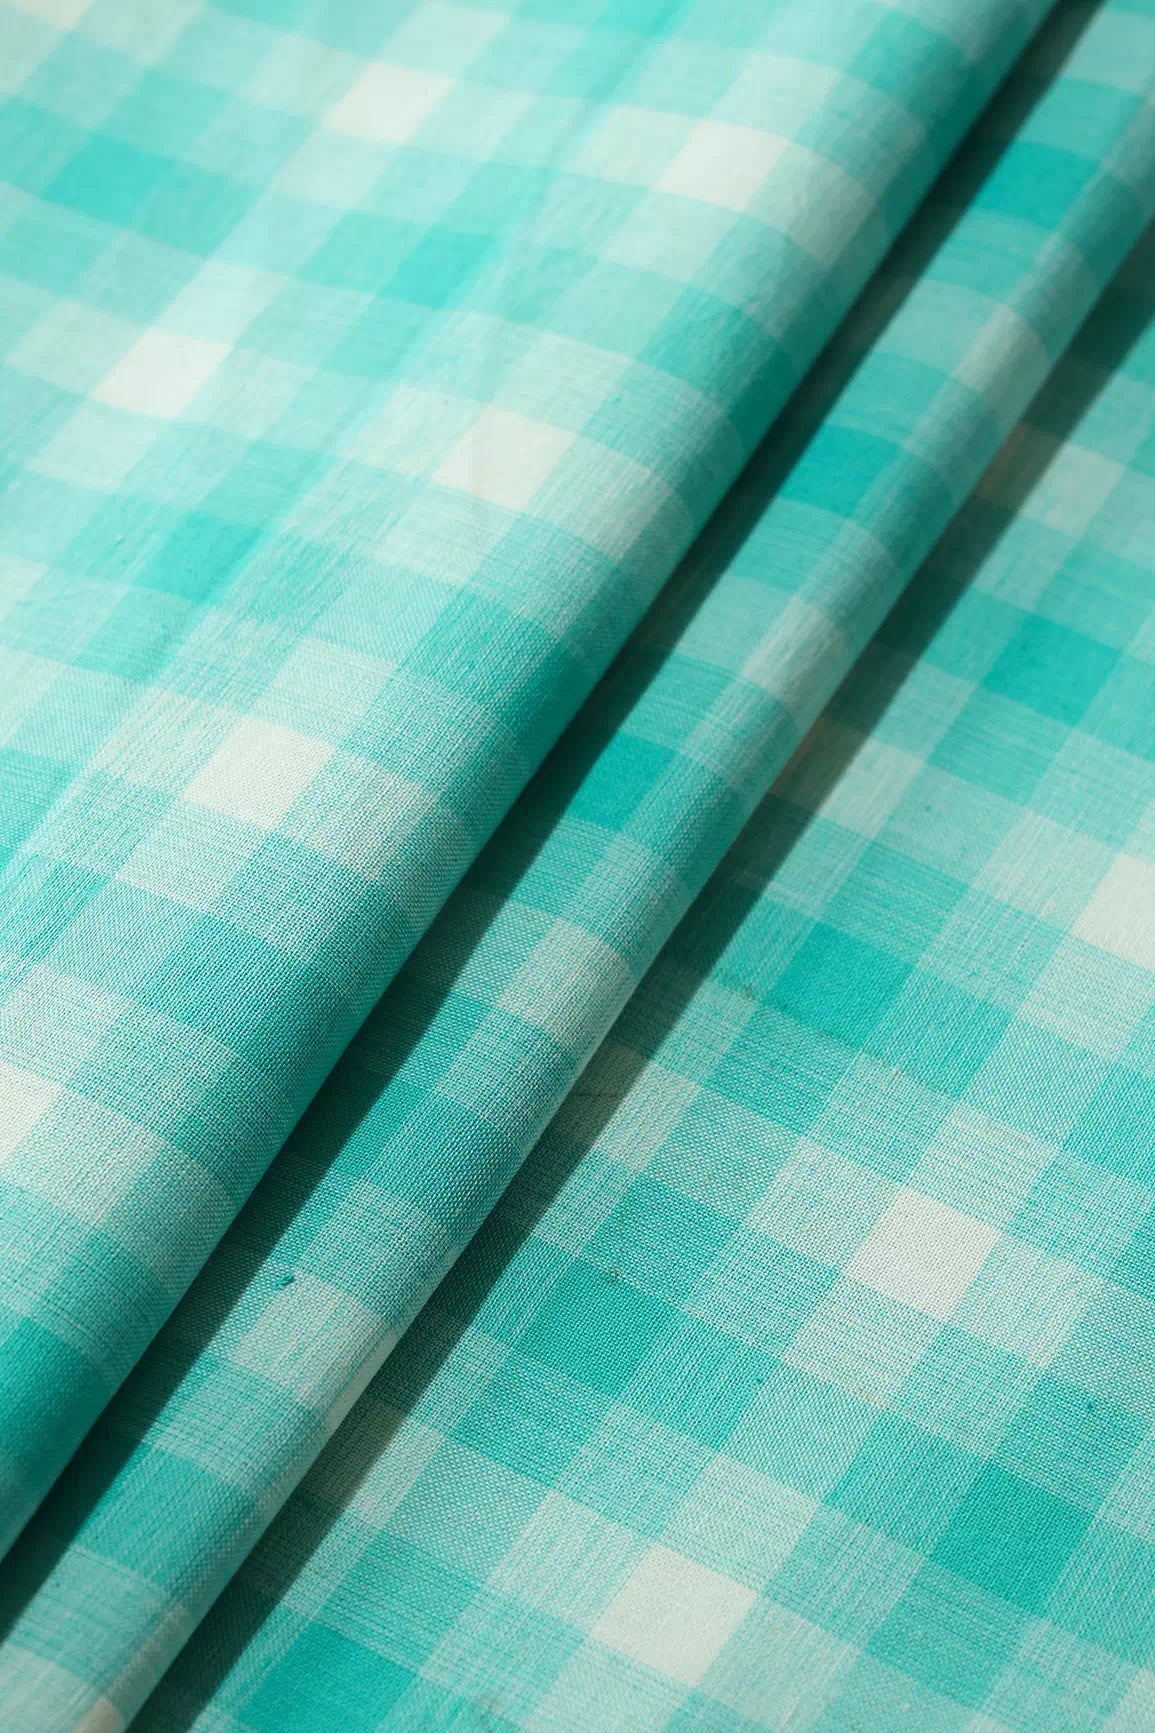 Turquoise And White Checks Pattern Handwoven Organic Cotton Fabric